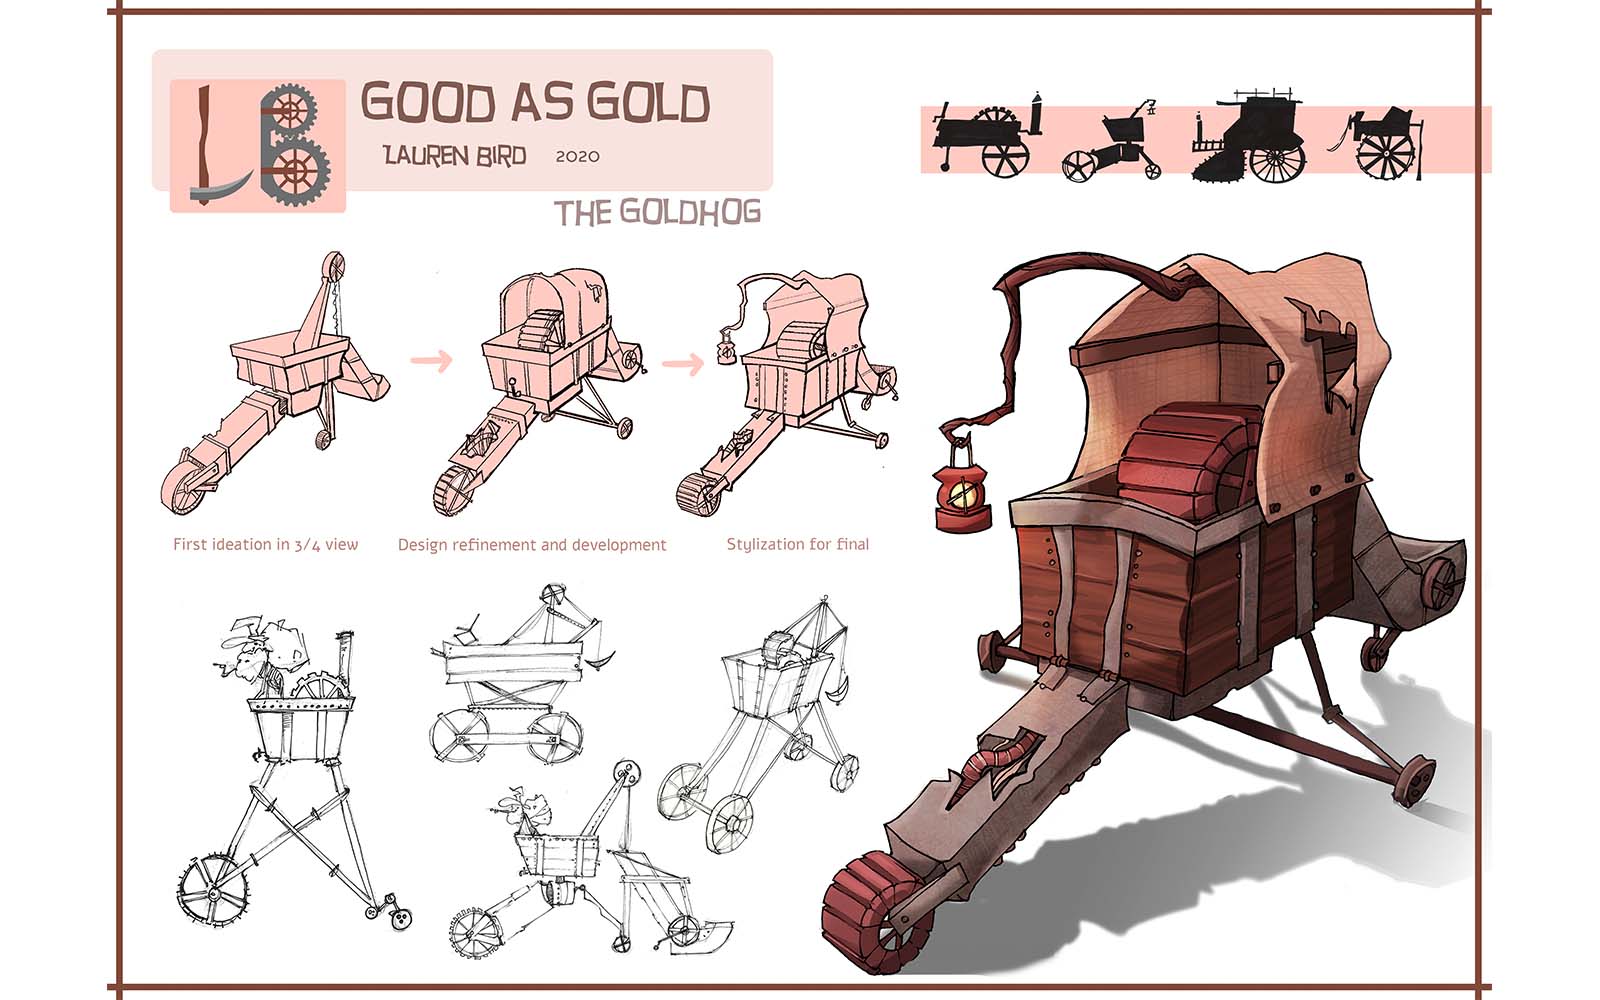 A design sketch for an imagined machine called the Goldhog